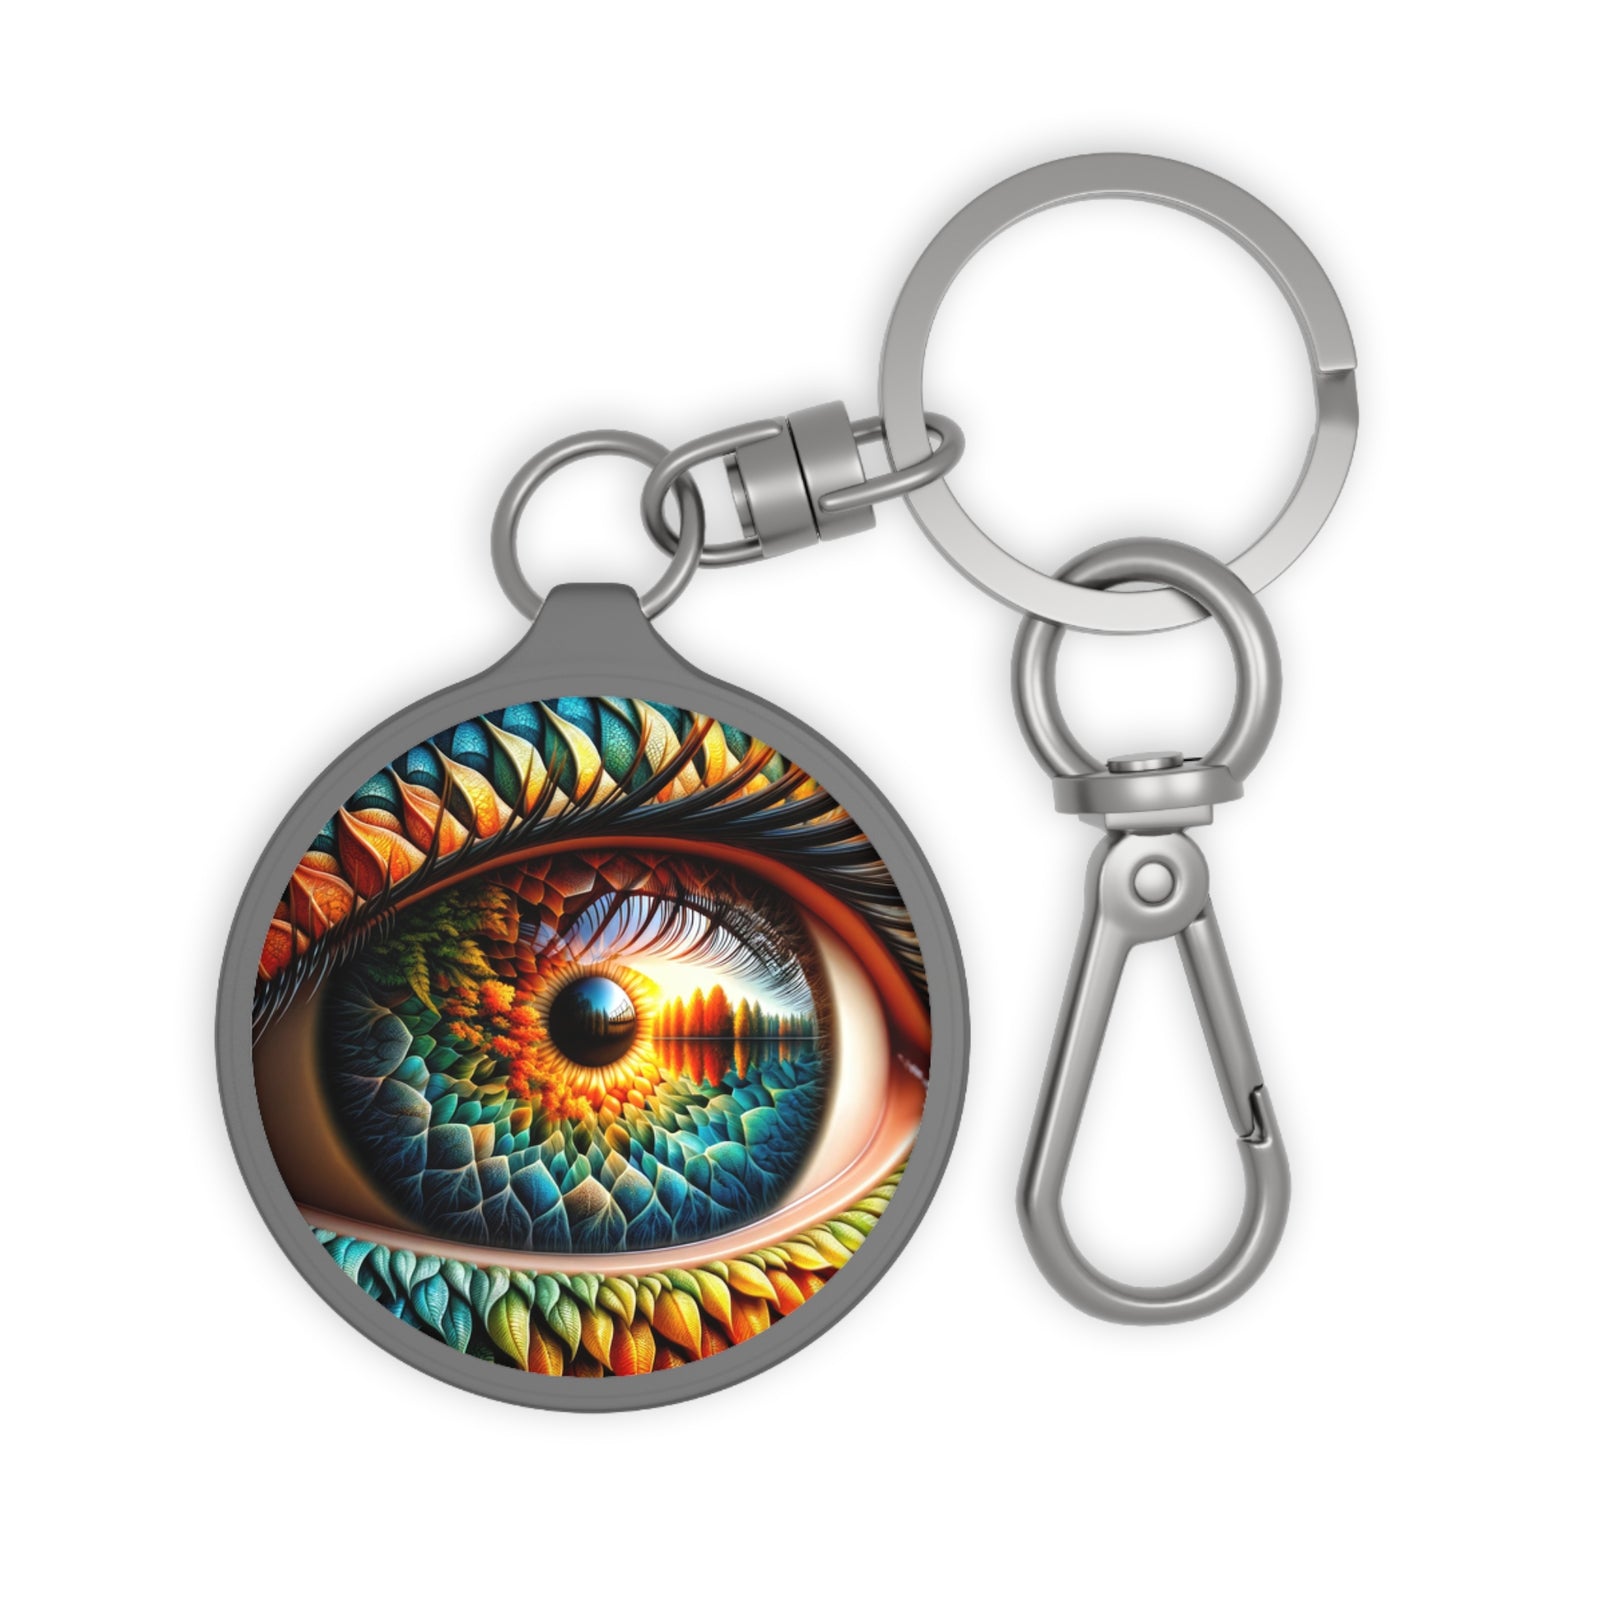 The Watchers' Whispers Keyring Tag